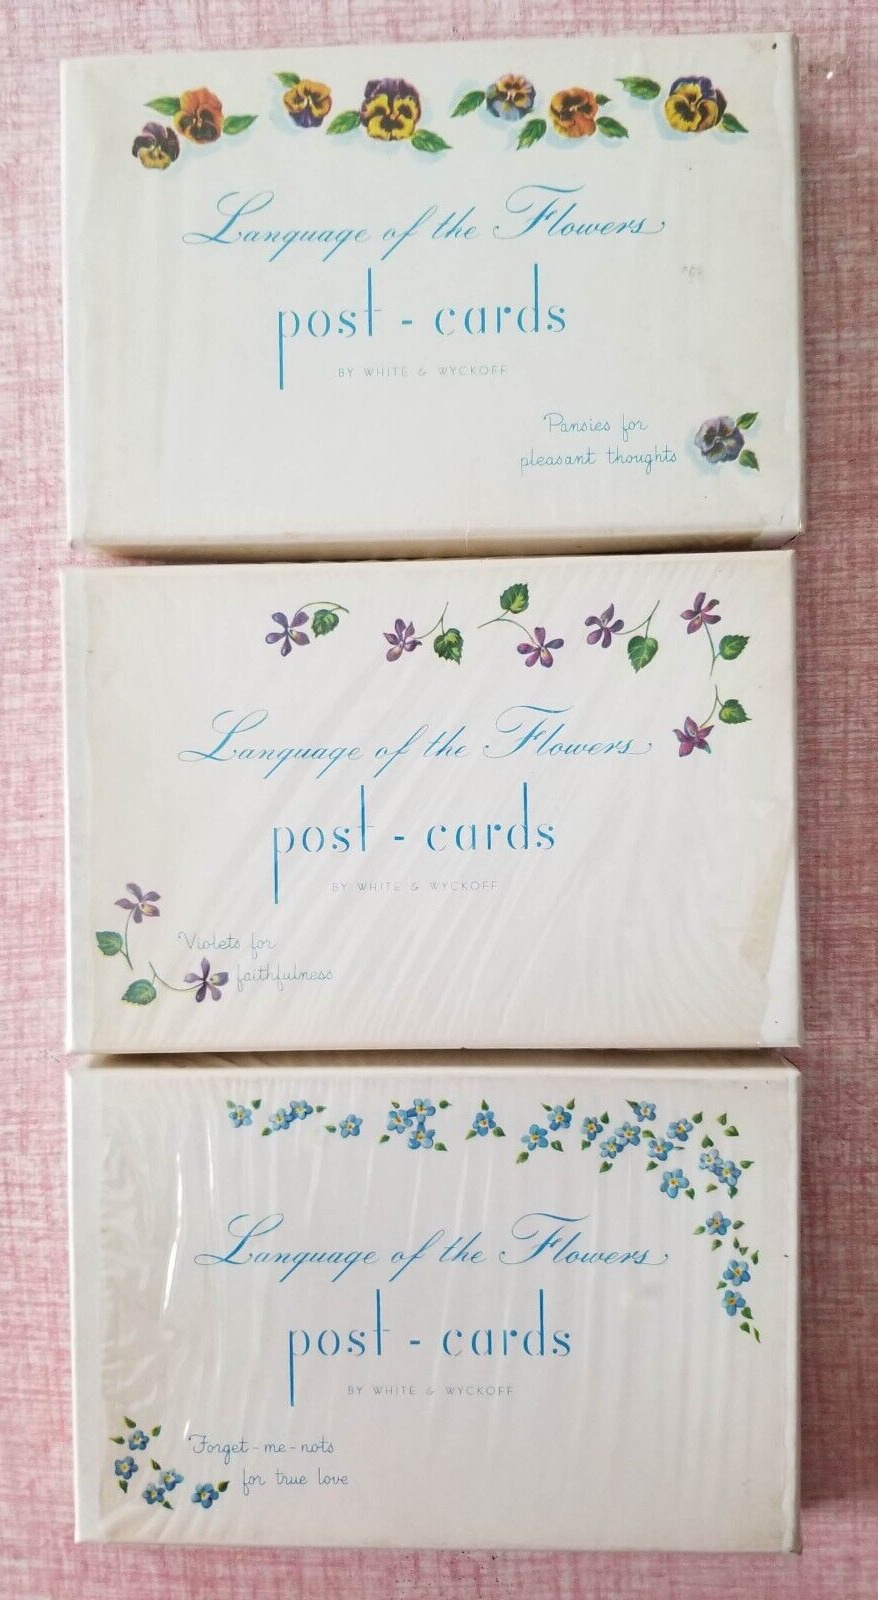 Lot of 3 Language of the Flowers Postcard Boxes Forget-Me-Nots, Pansies, Violets